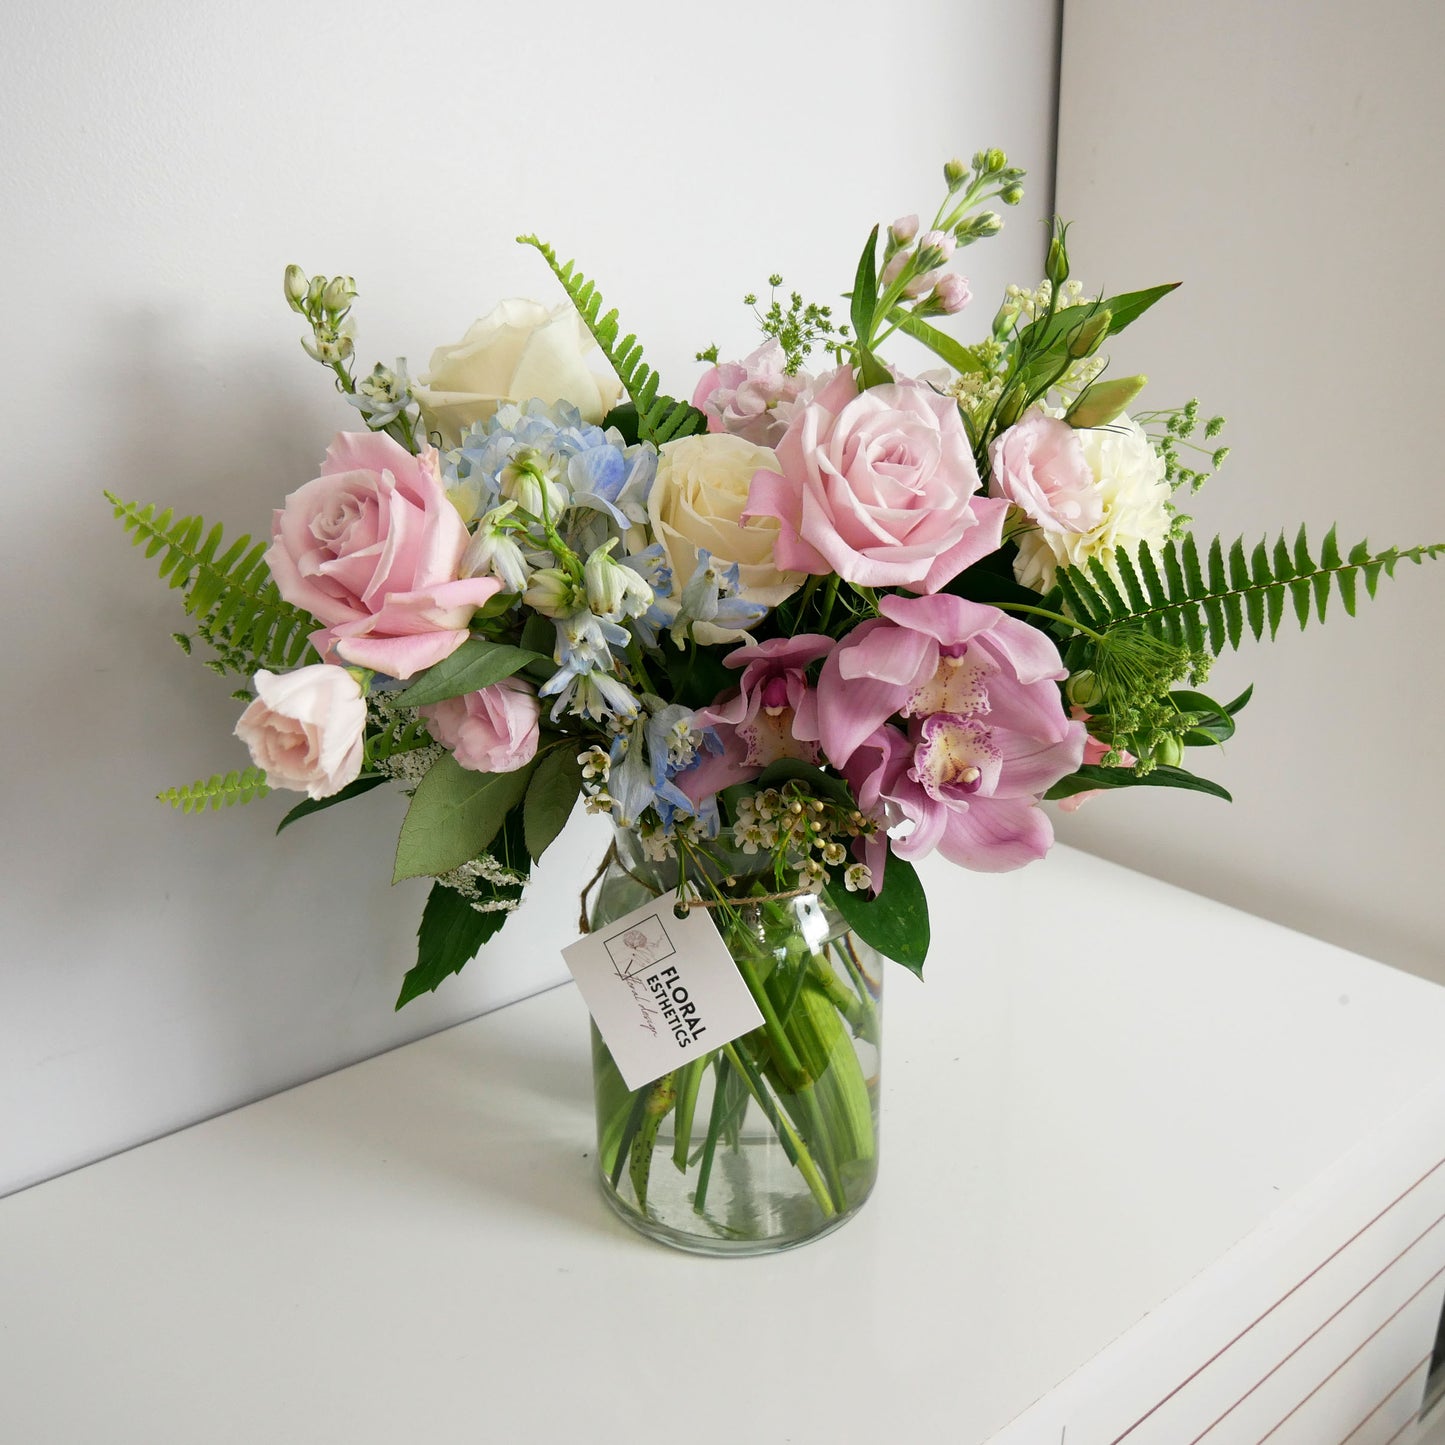 Pastel color premium size flower arrangement in clear vase featuring pink orchids and roses, white roses, delphinium, lizianthus and more